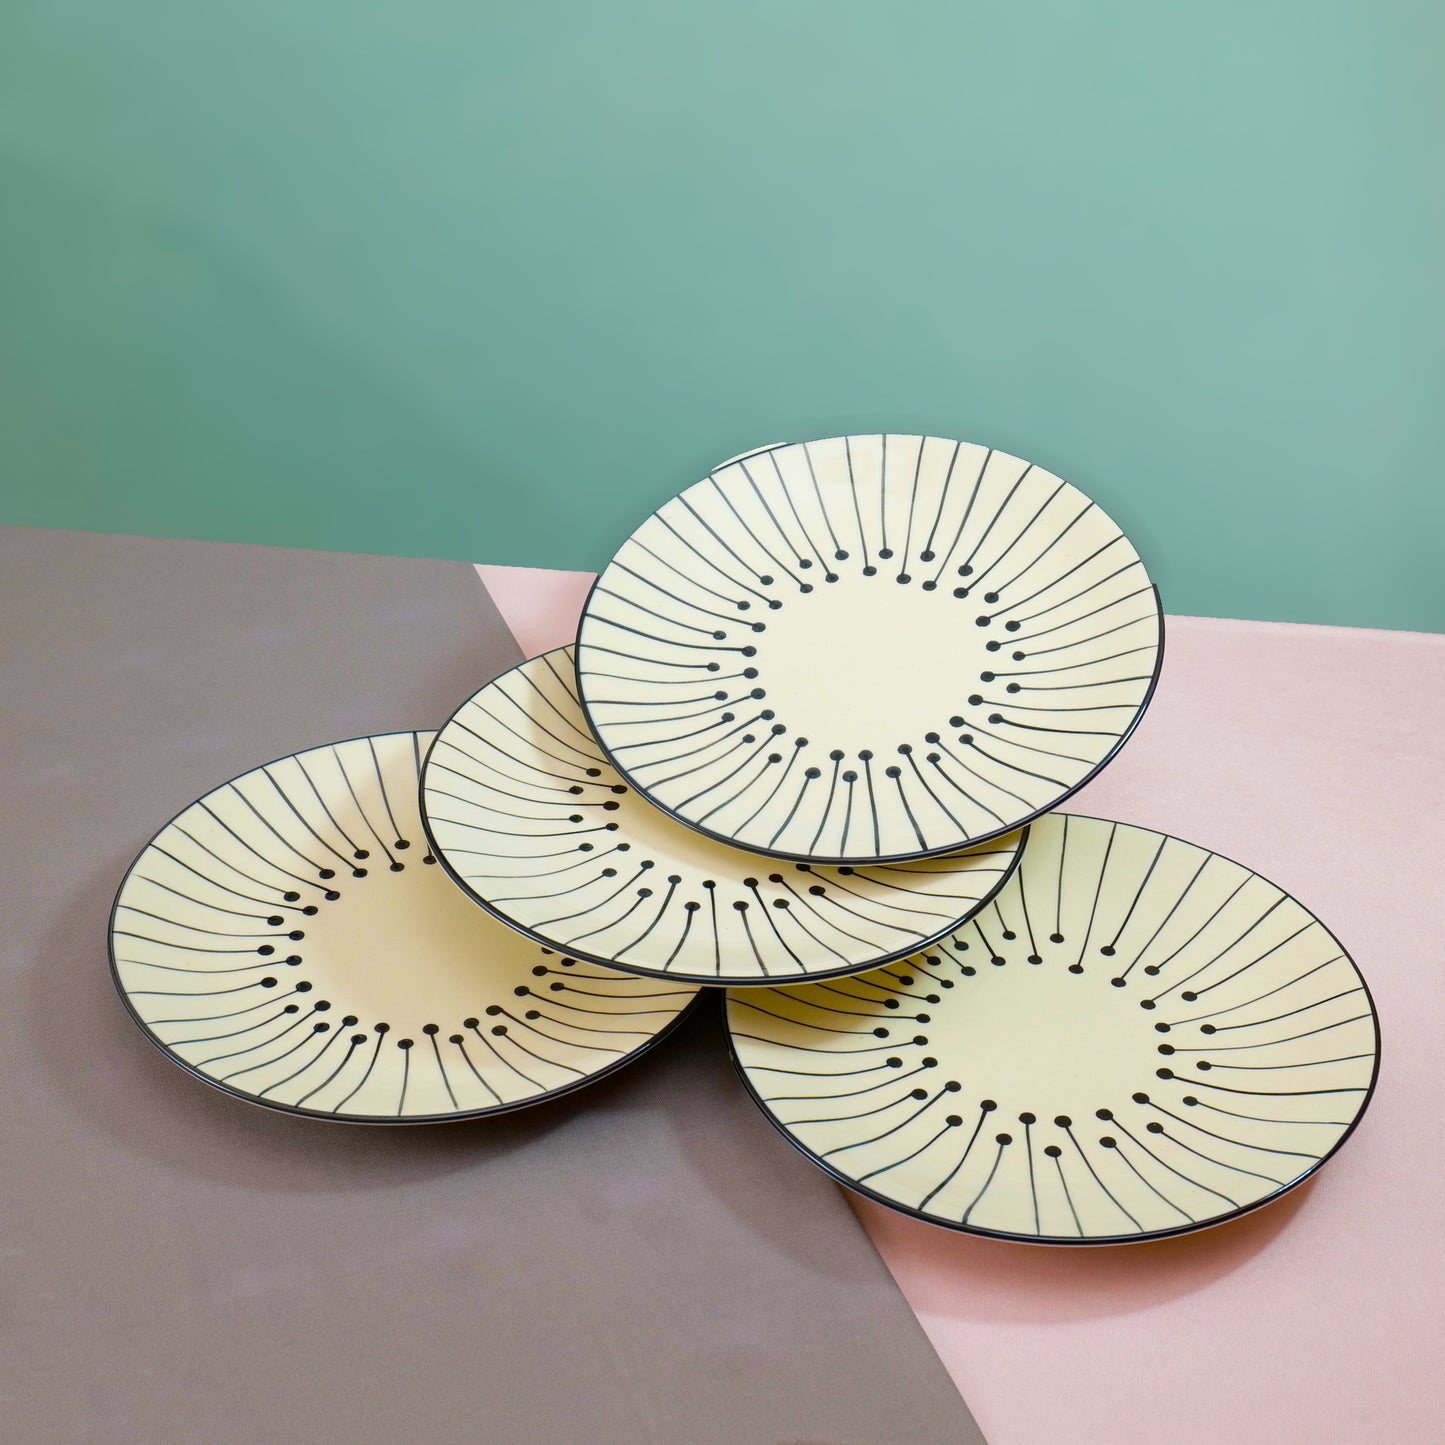 'Dripping Lines' Ceramic Studio Pottery Dinner Plates 10 Inch